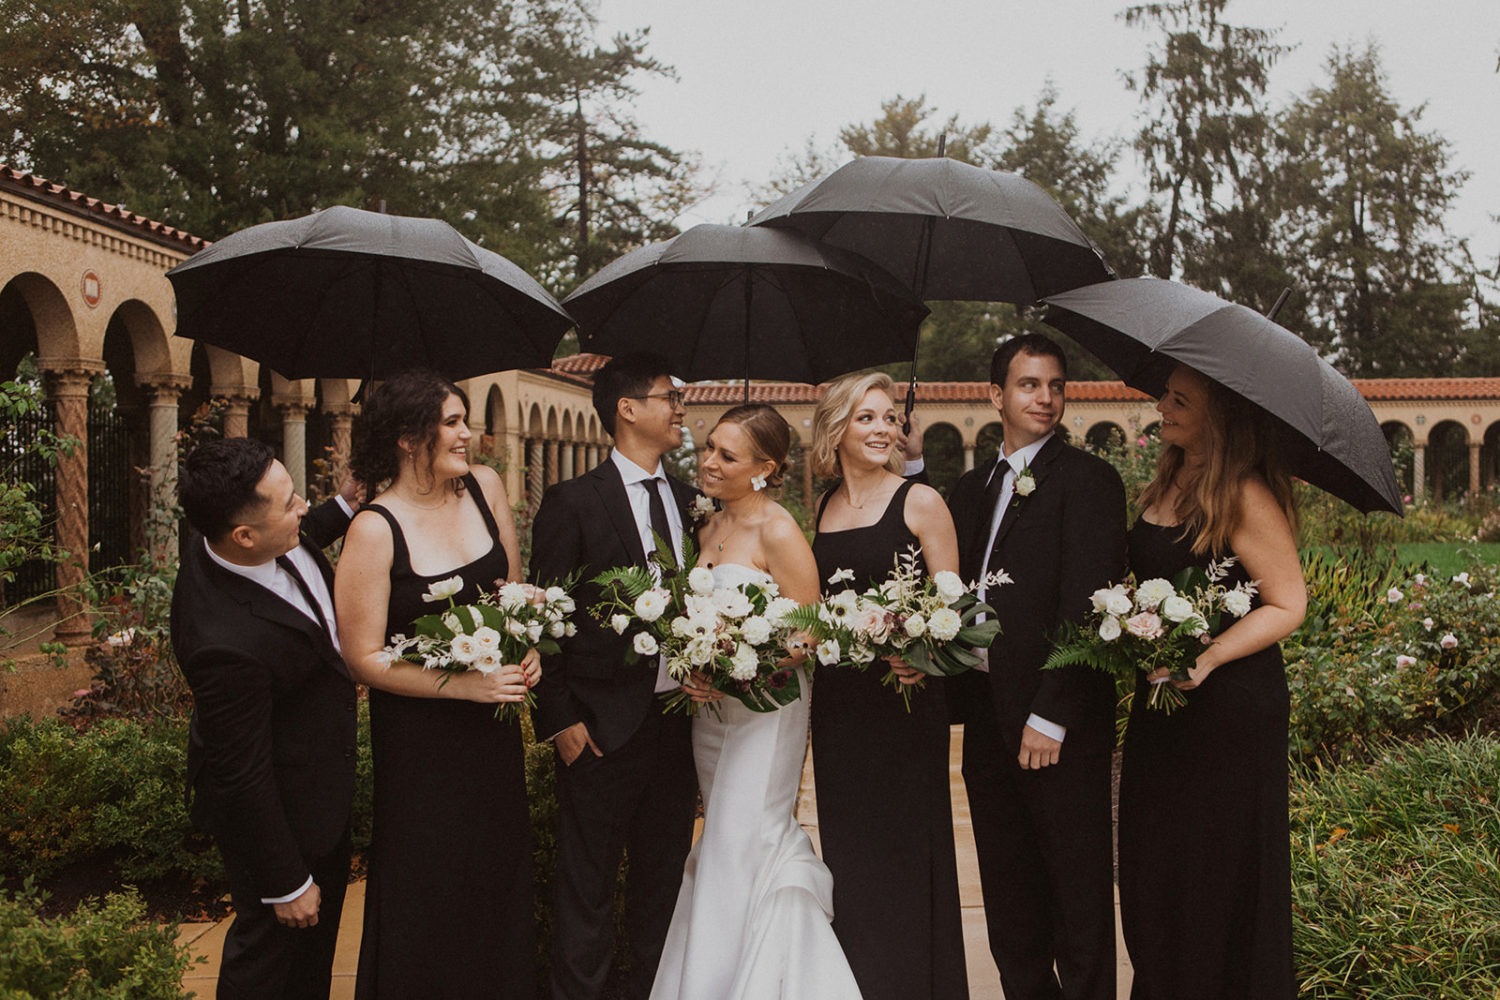 Couple stands under umbrellas with wedding party at intimate wedding